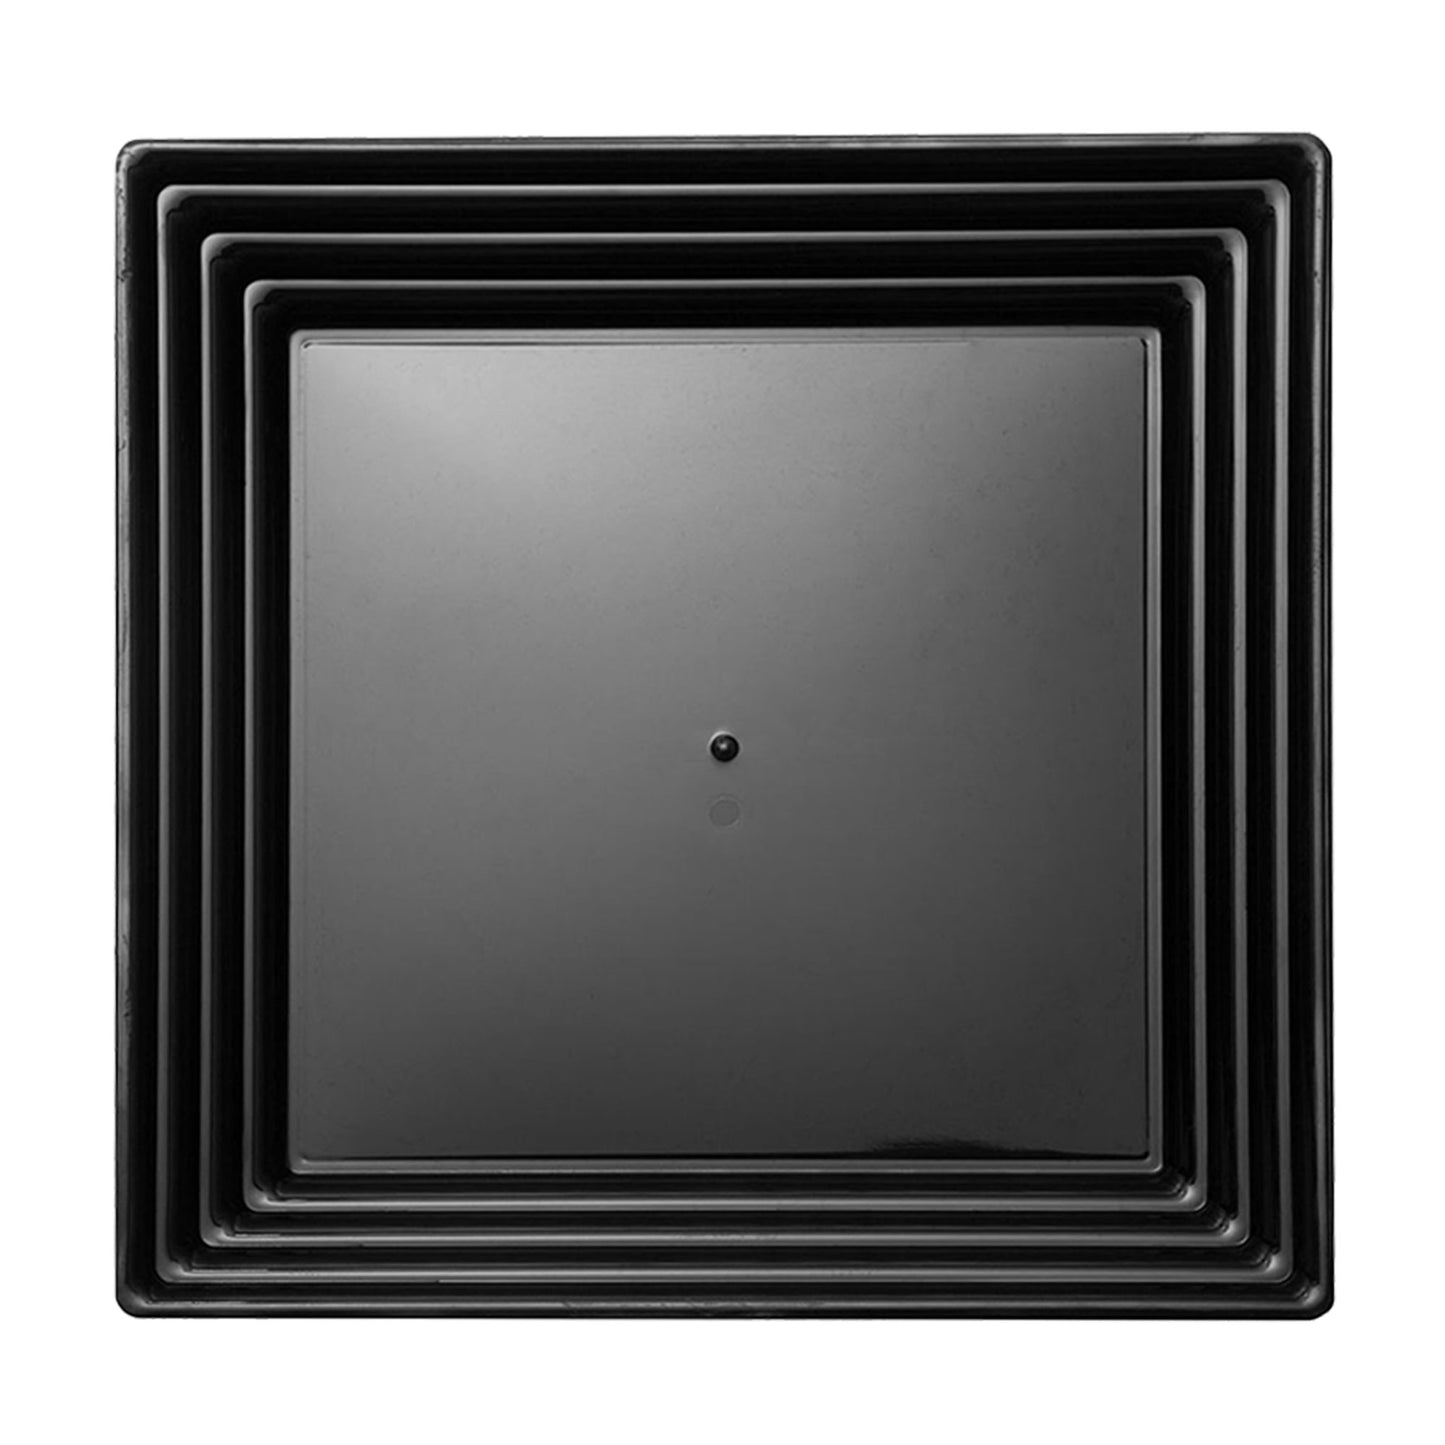 12" x 12" Black Square with Groove Rim Plastic Serving Trays | The Kaya Collection